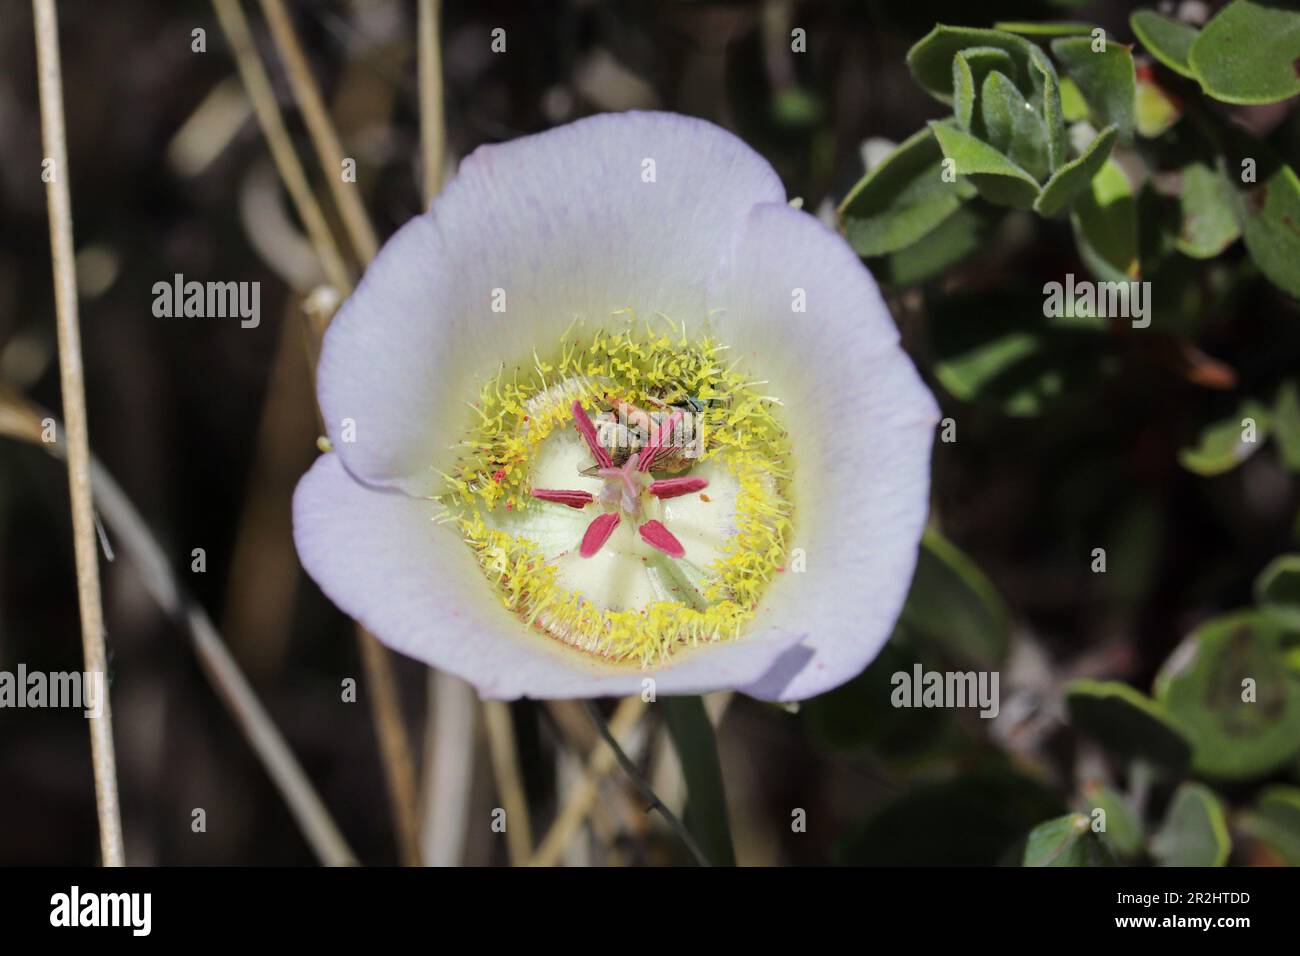 Close up of a Sego lily or Calochortus nuttallii with a small bee in it at Rumsey Park in Payson, Arizona. Stock Photo